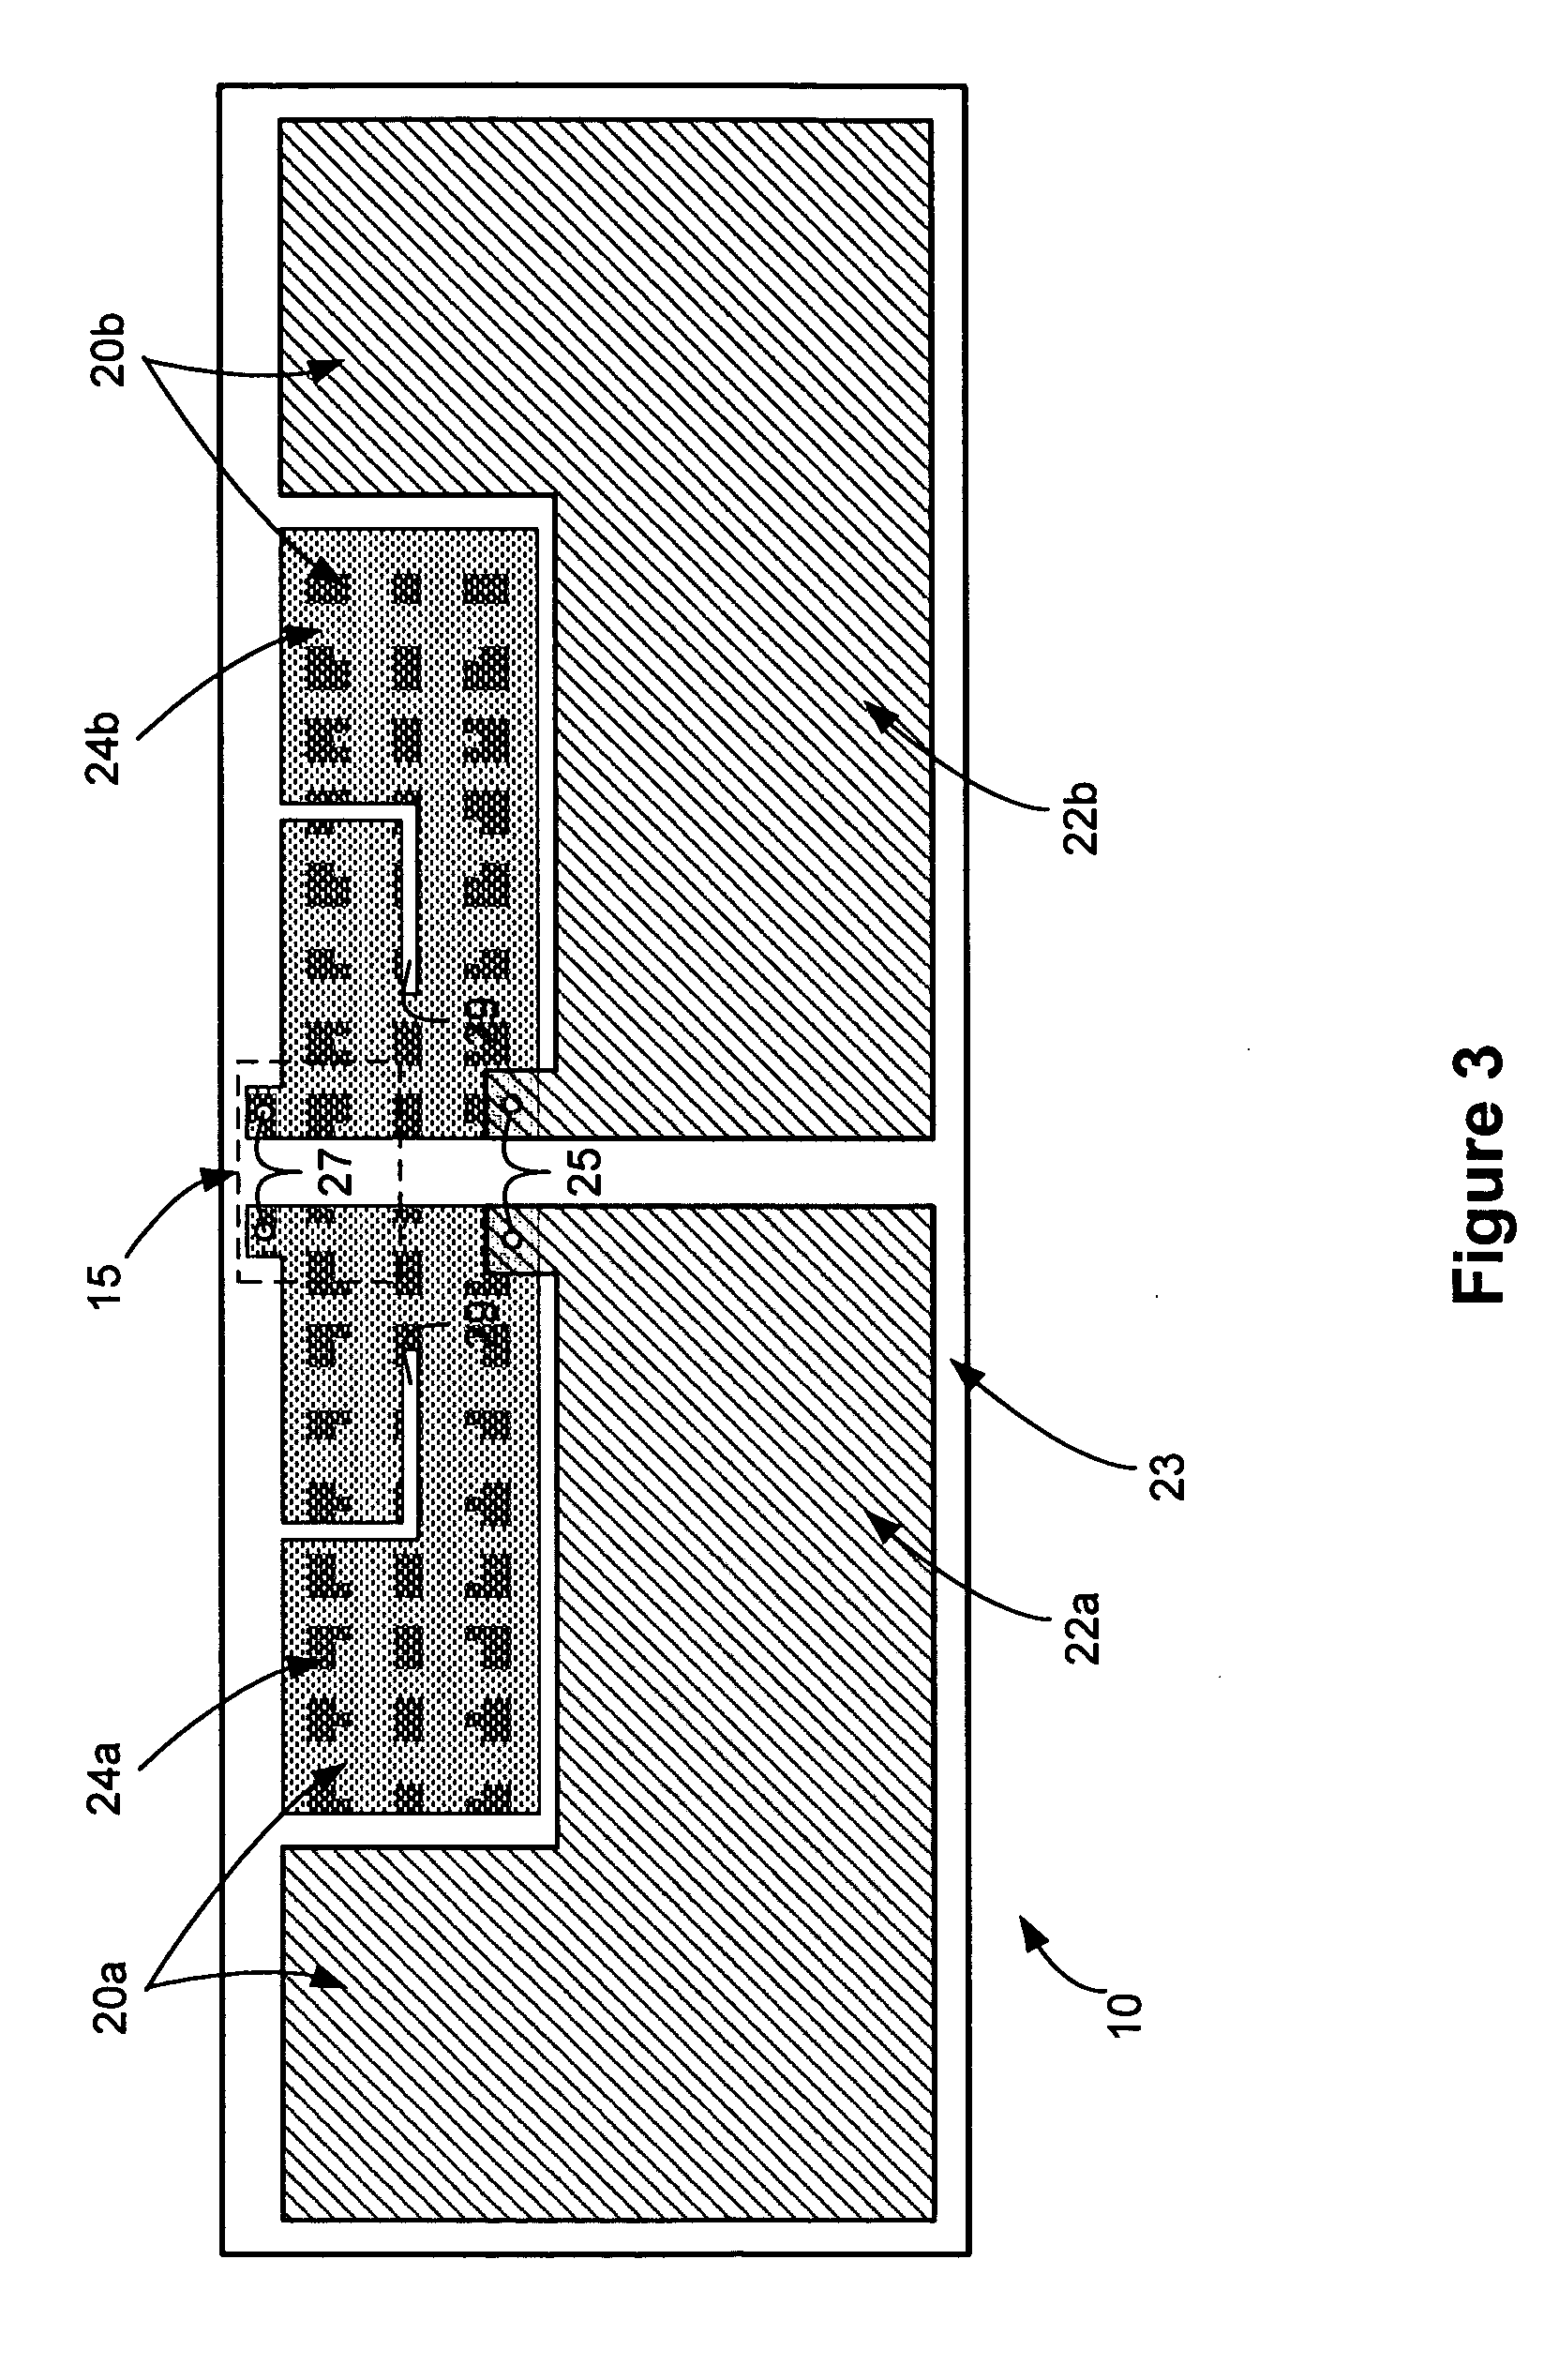 Method and apparatus for multiple frequency RFID tag architecture